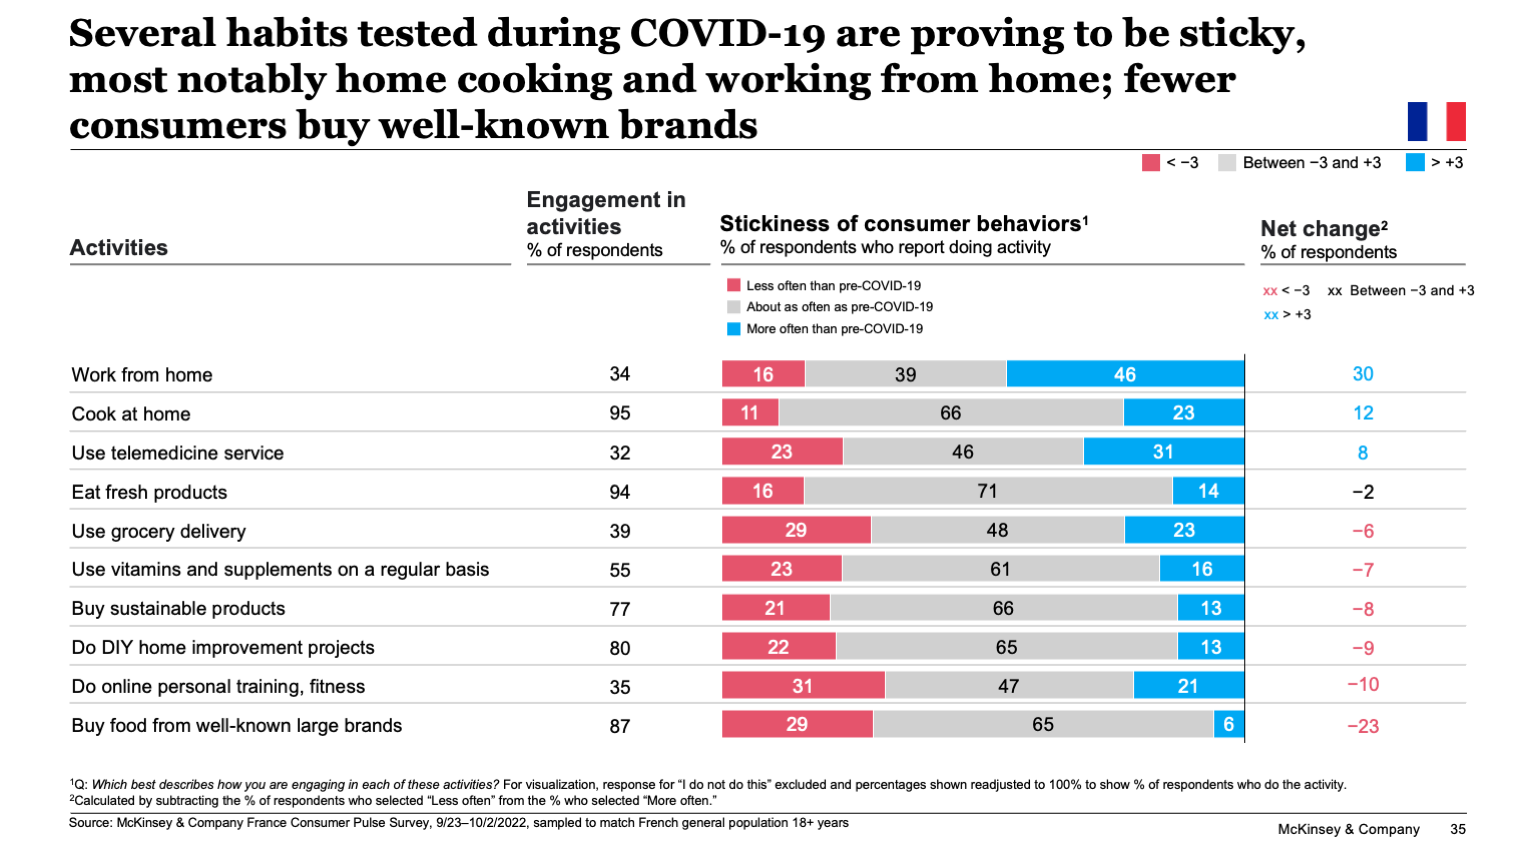 Several habits tested during COVID-19 are proving to be sticky, most notably home cooking and working from home; fewer consumers buy well-known brands